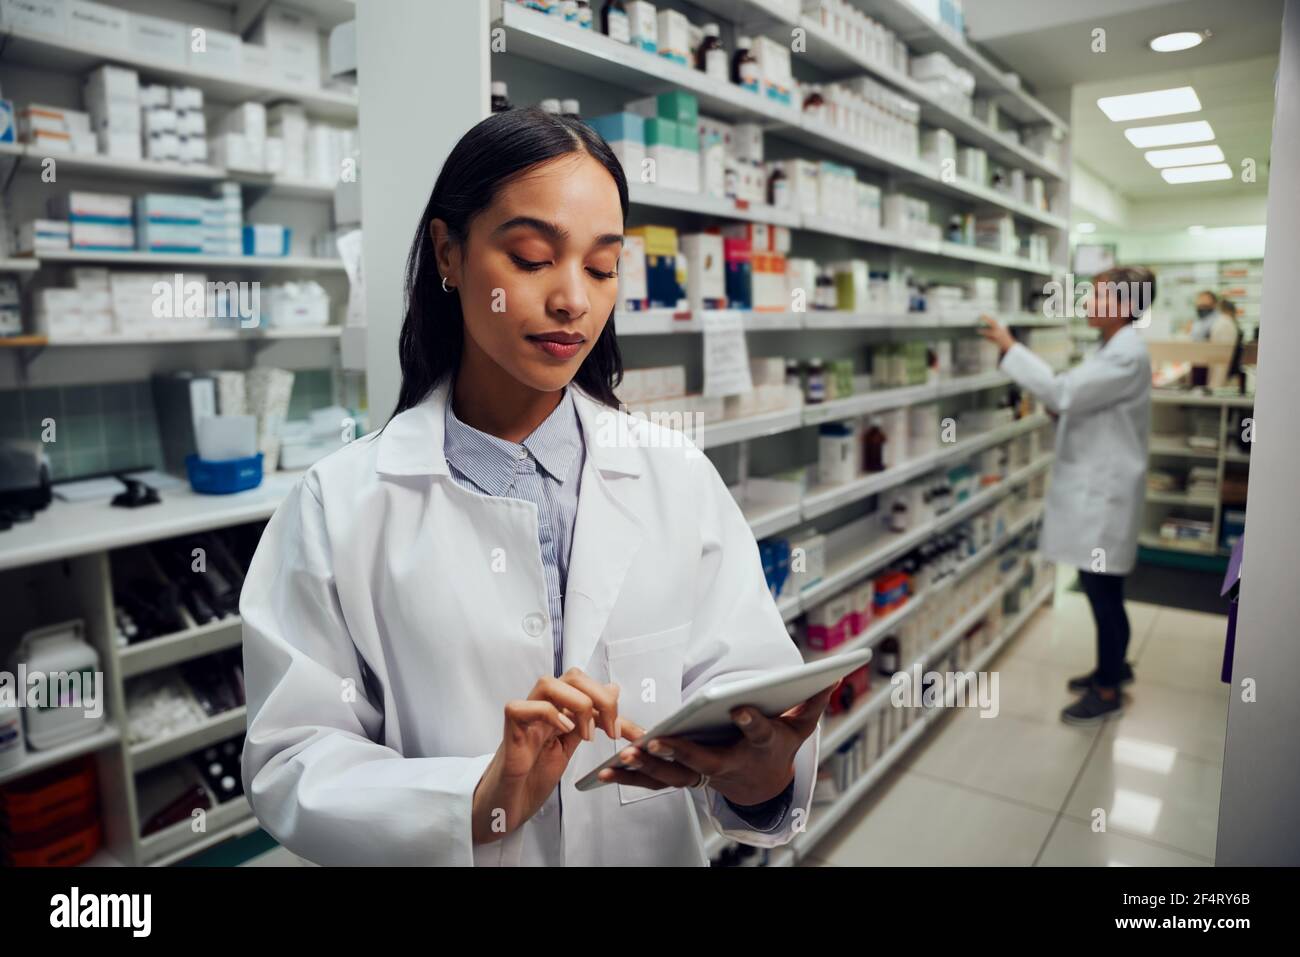 Young female woman wearing labcoat working in chemist using digital tablet Stock Photo